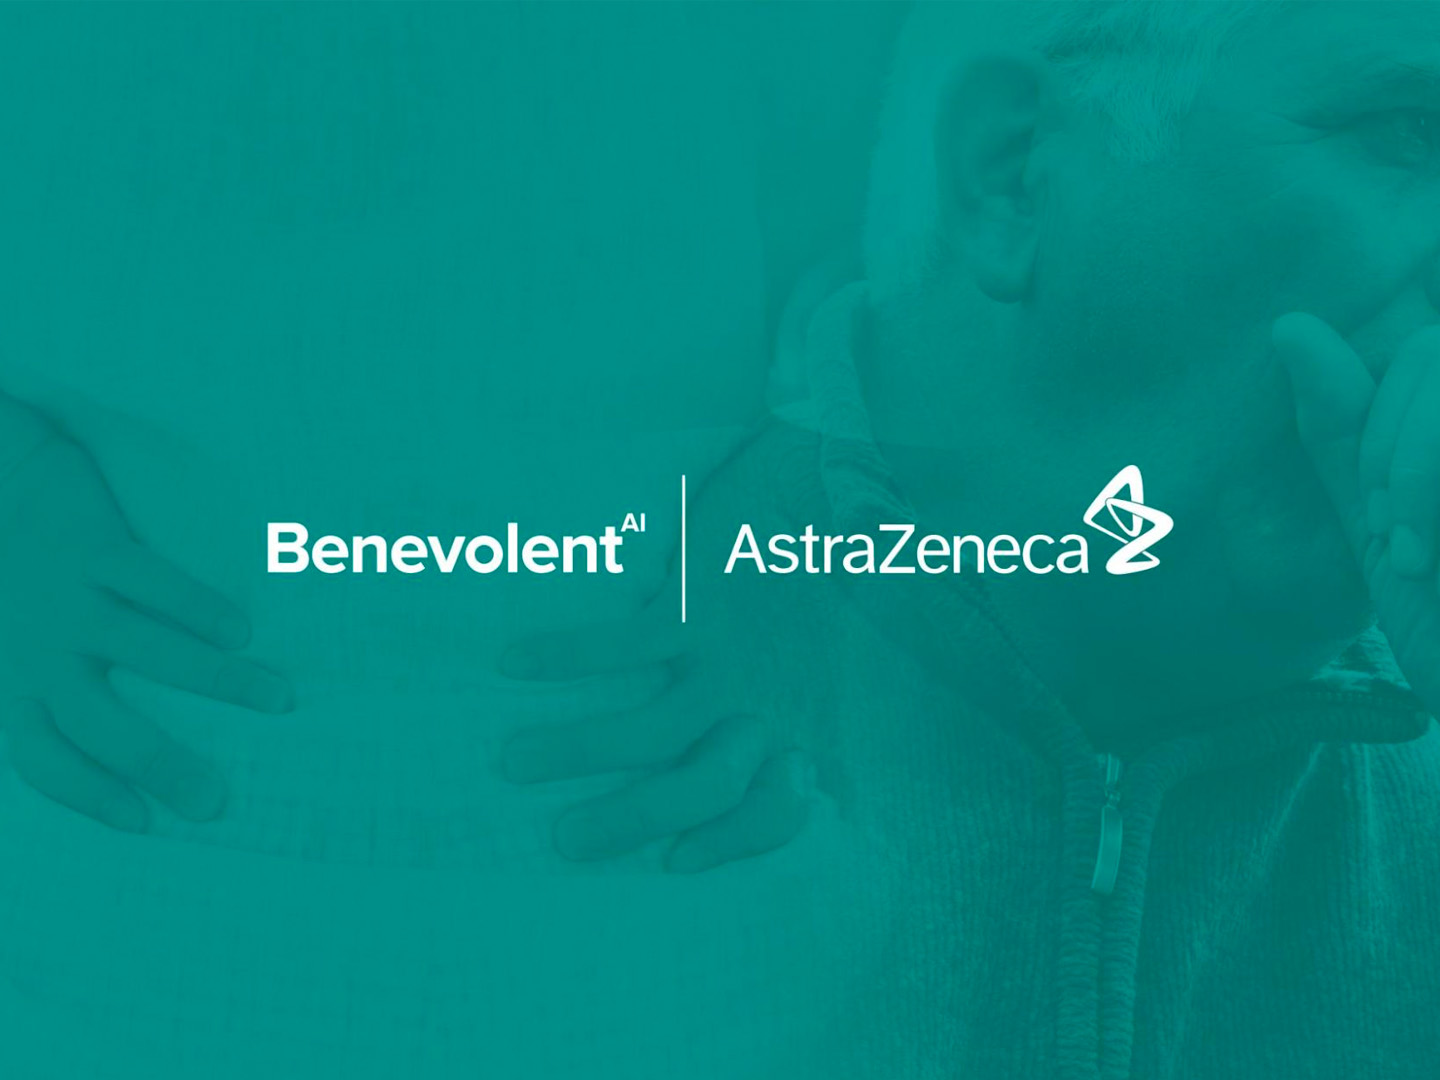 BenevolentAI_achieves_further_milestones_in_AI-enabled_target_identification_collaboration_with_AstraZeneca.jpg